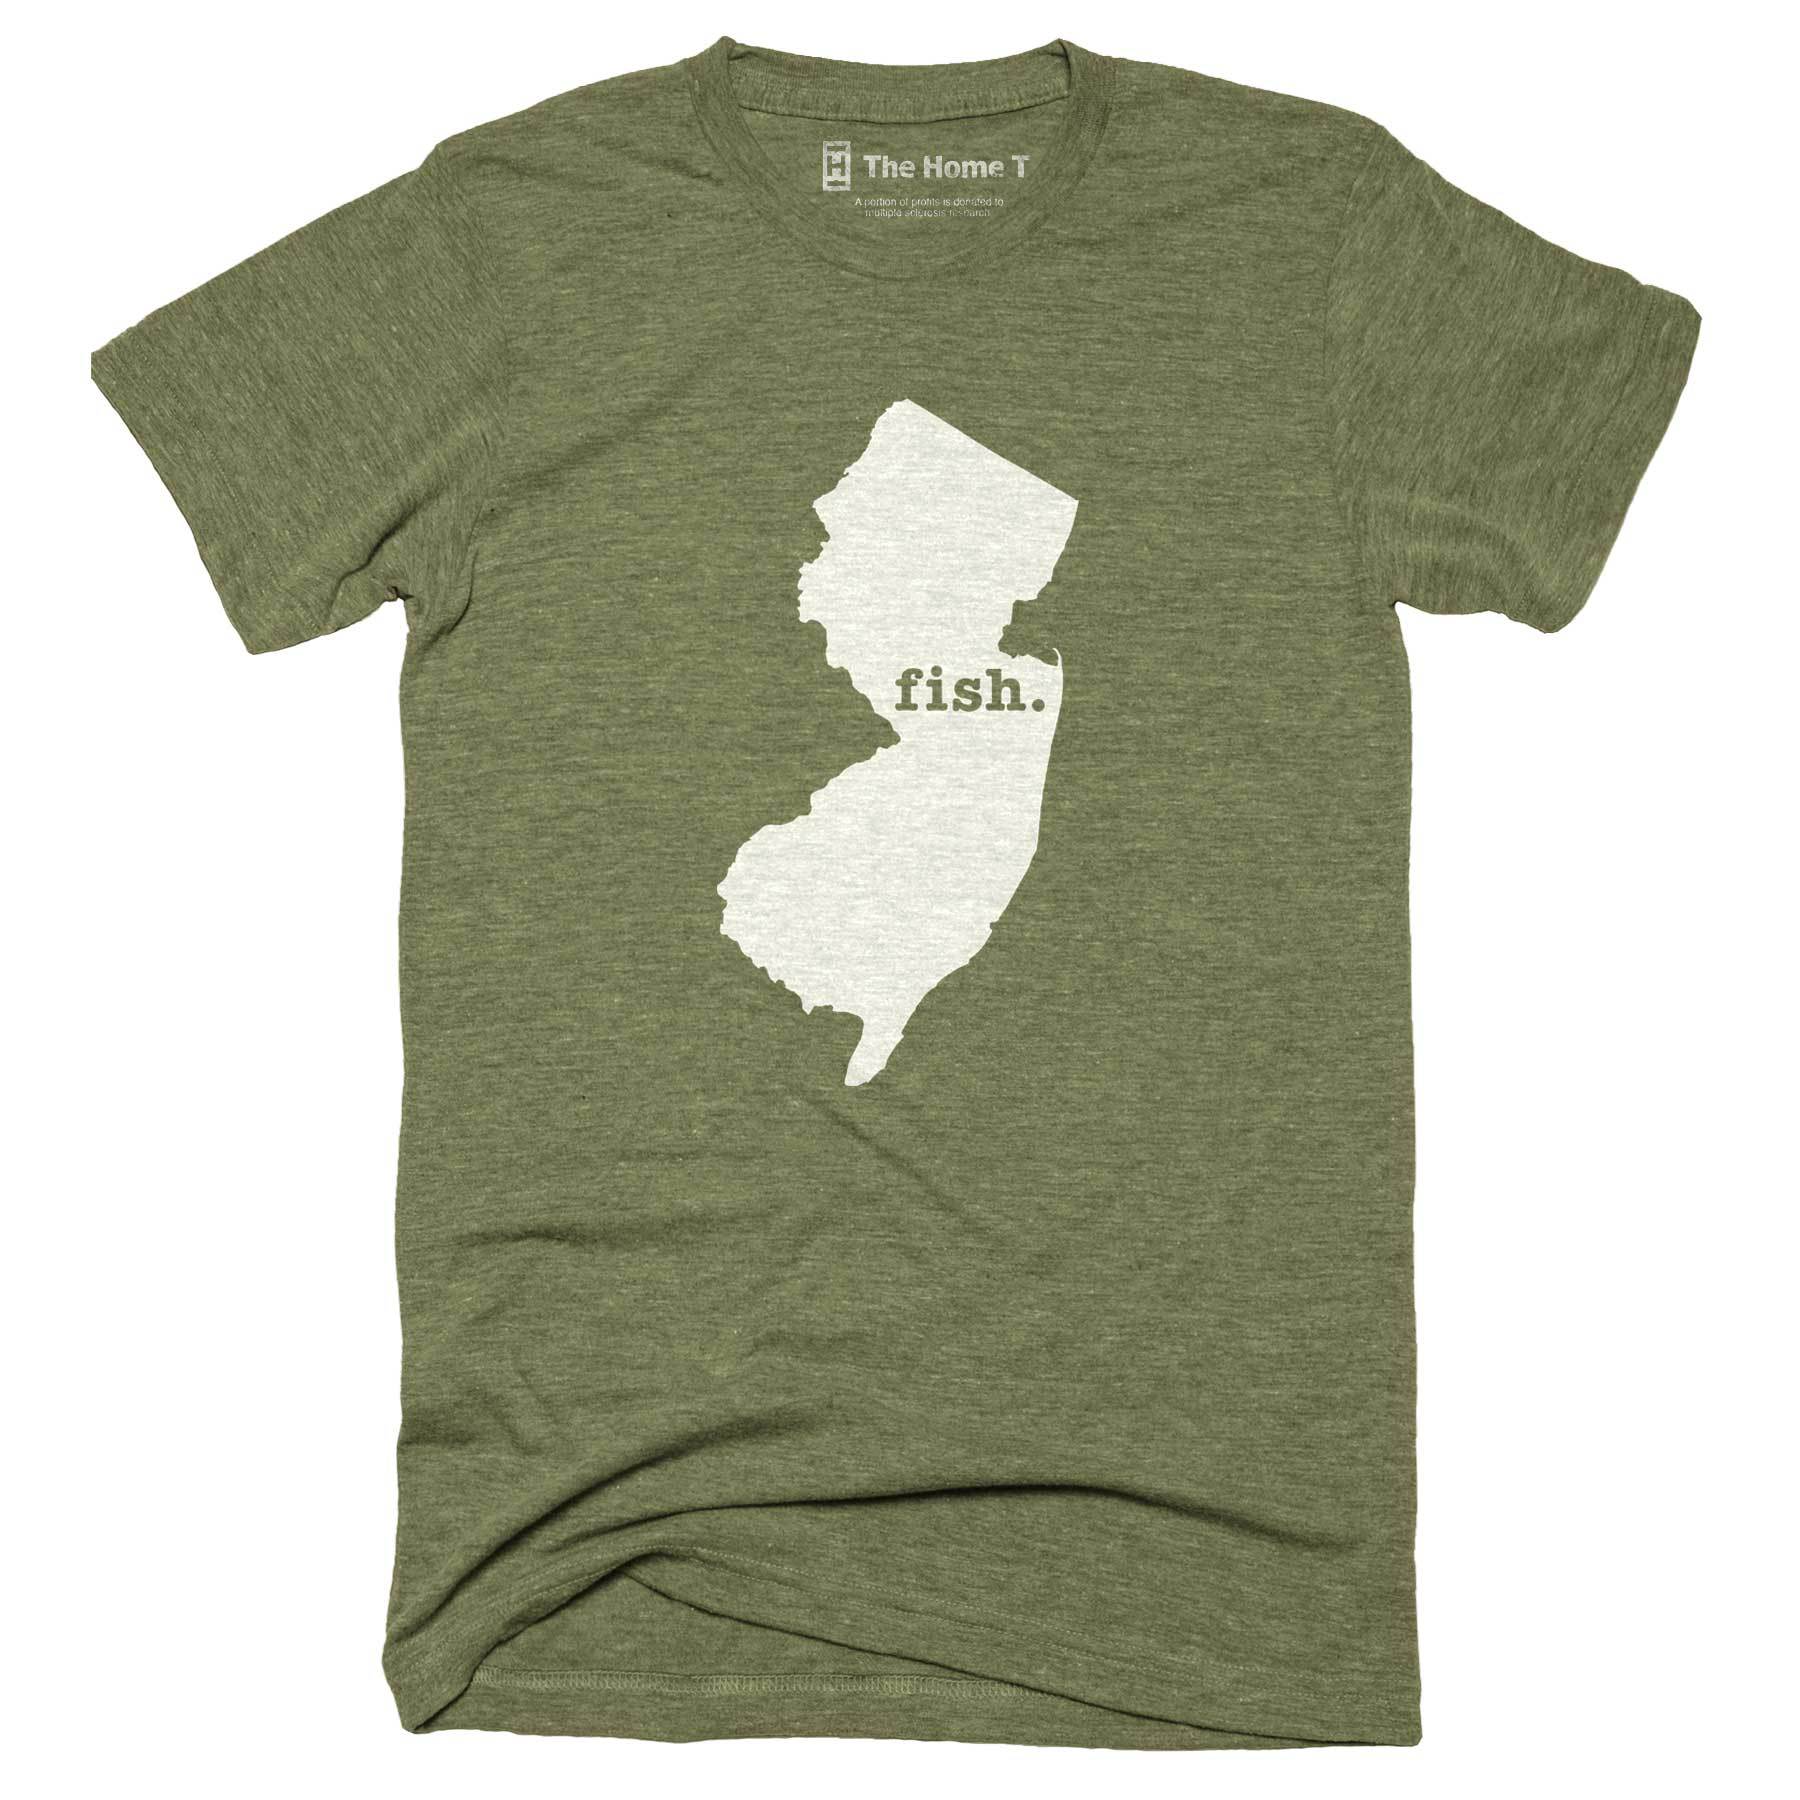 New Jersey Fish Home T-Shirt Outdoor Collection The Home T